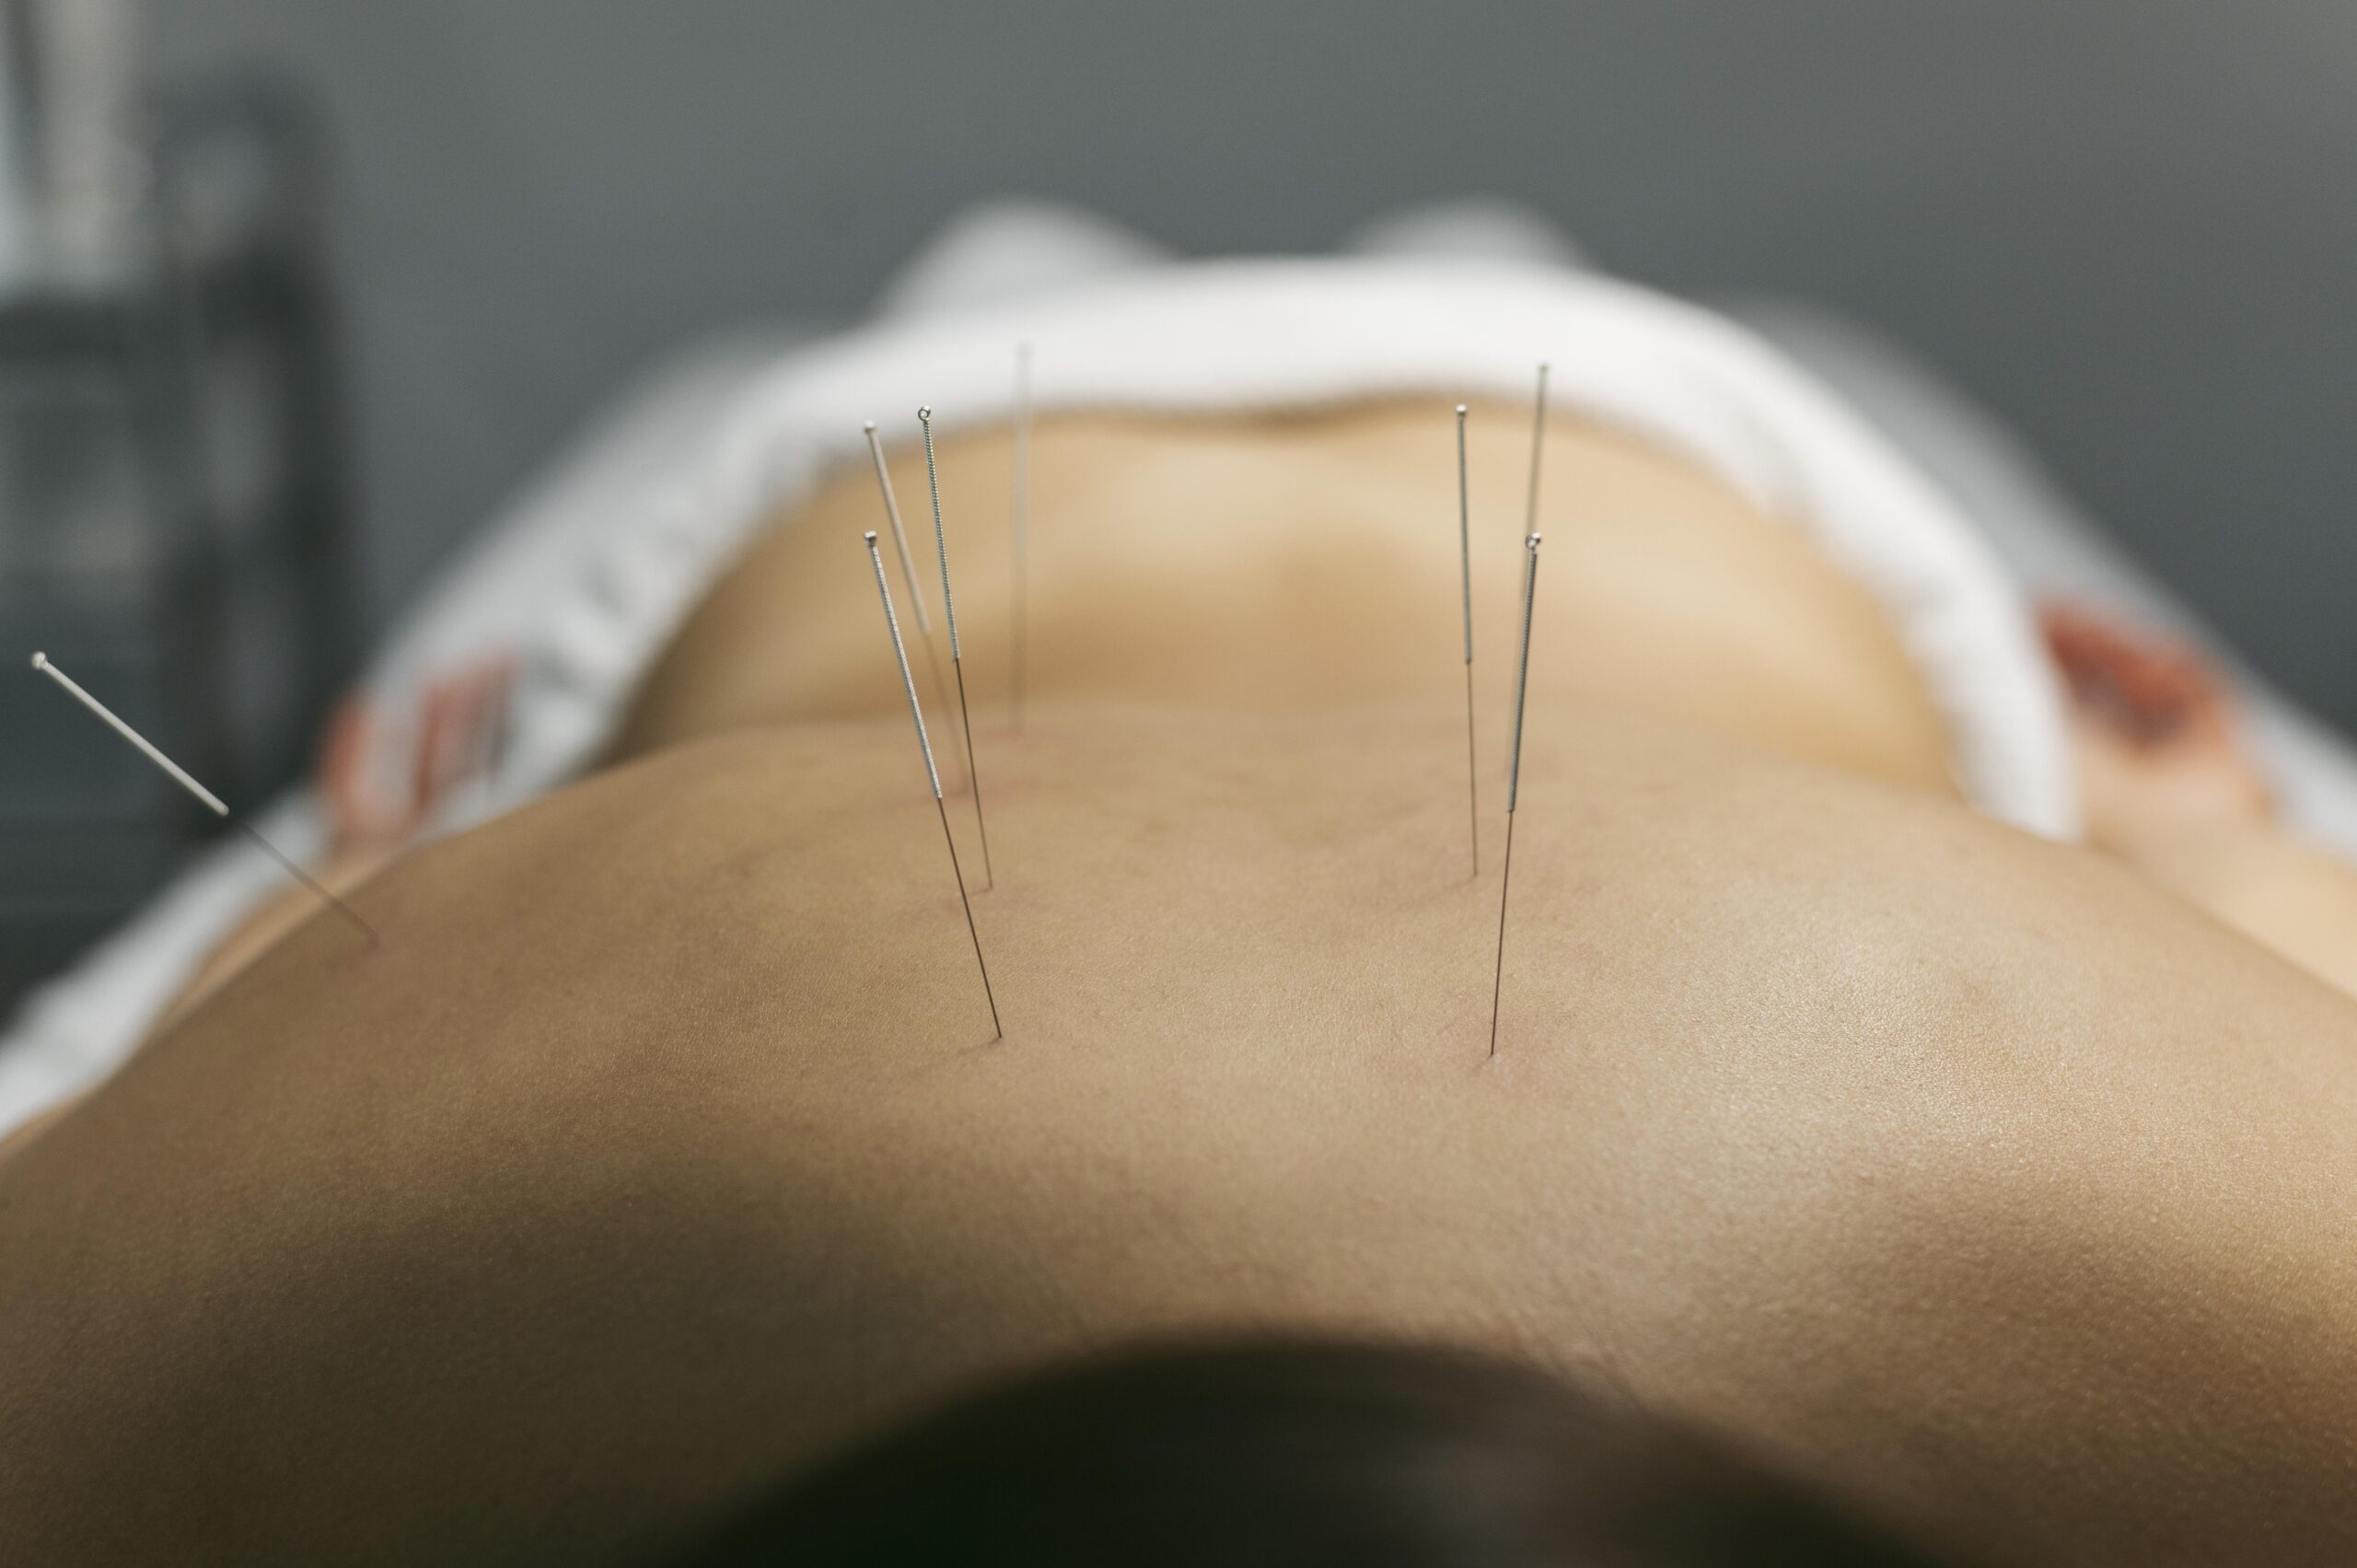 HOW TO INCORPORATE ACUPUNCTURE INTO YOUR YOGA PRACTICE FOR PHYSICAL AND EMOTIONAL HEALTH DURING COVID-19 PANDEMIC